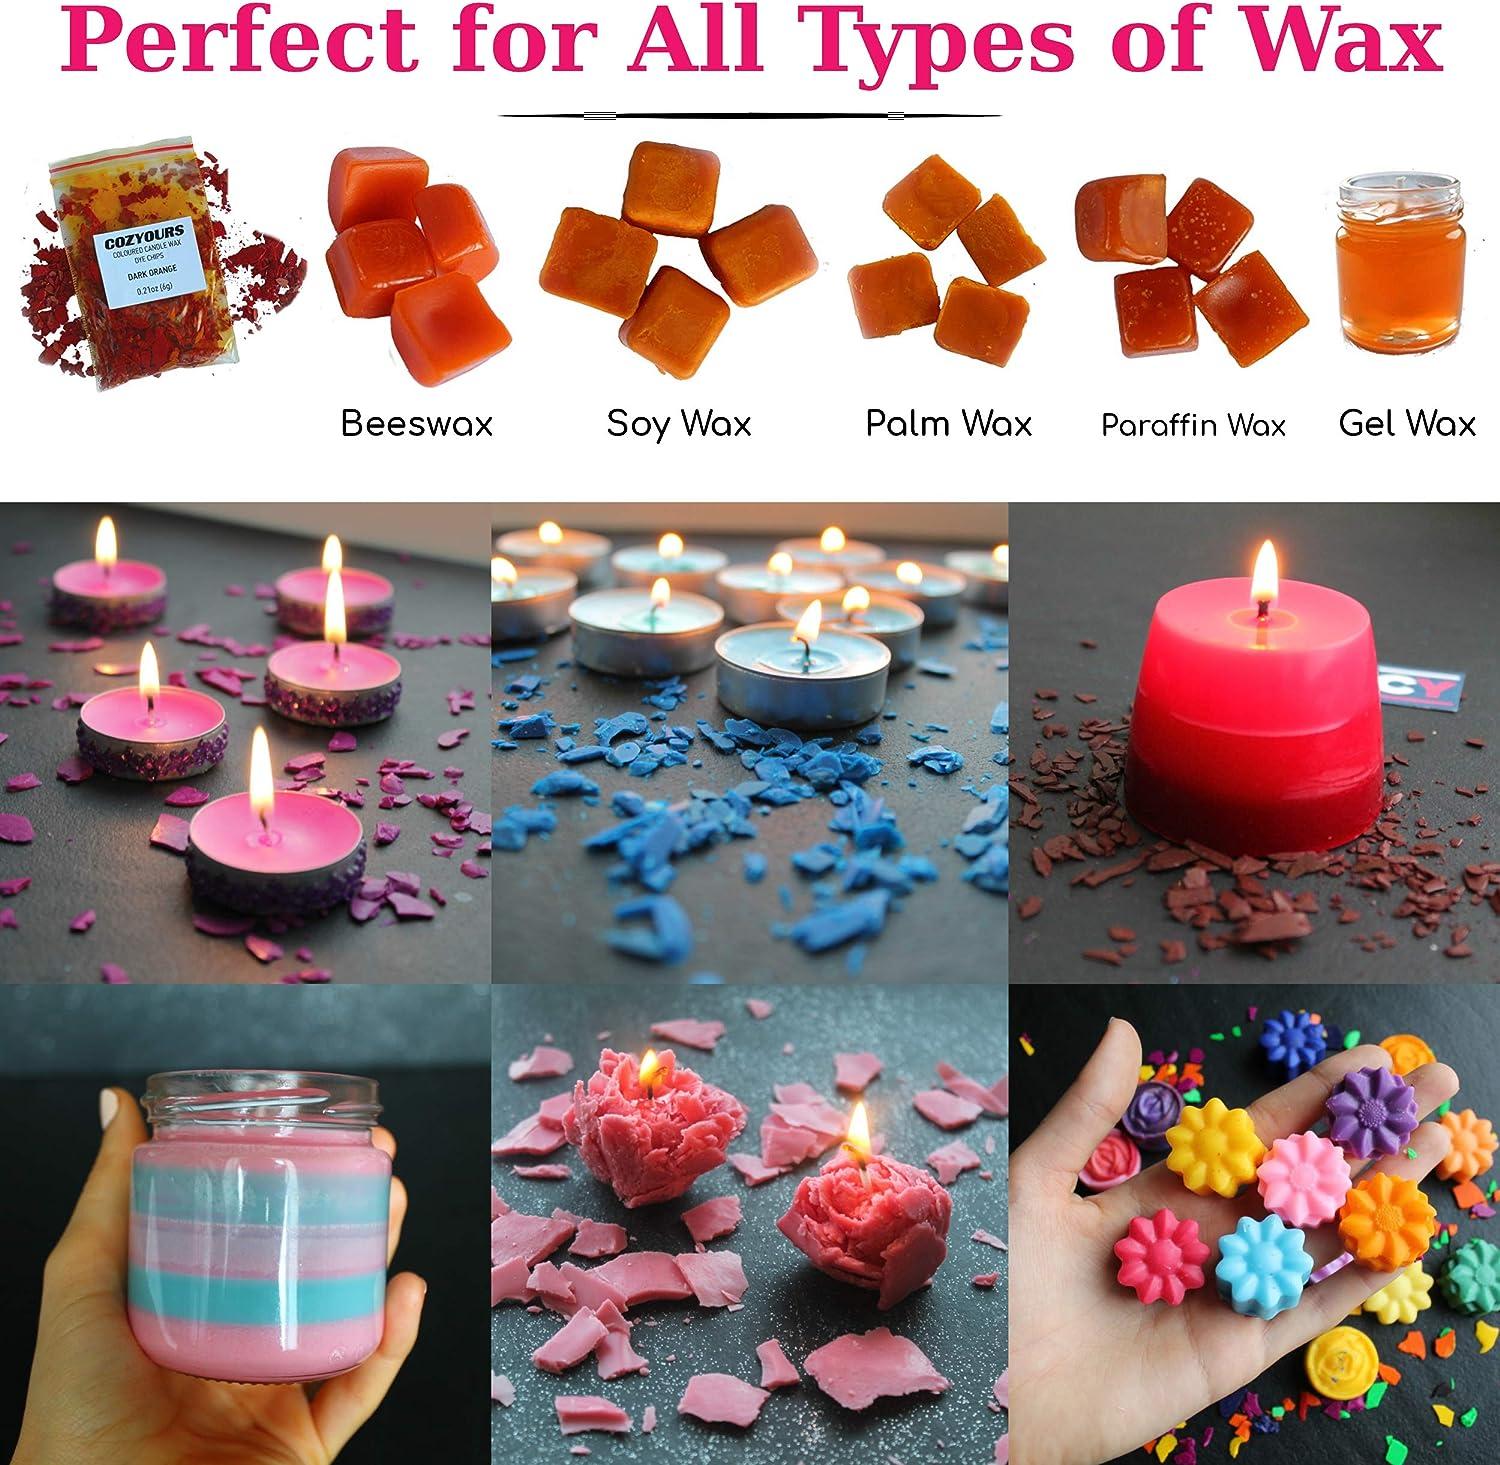 How to Dye Candle Wax with Candle Dye Flakes